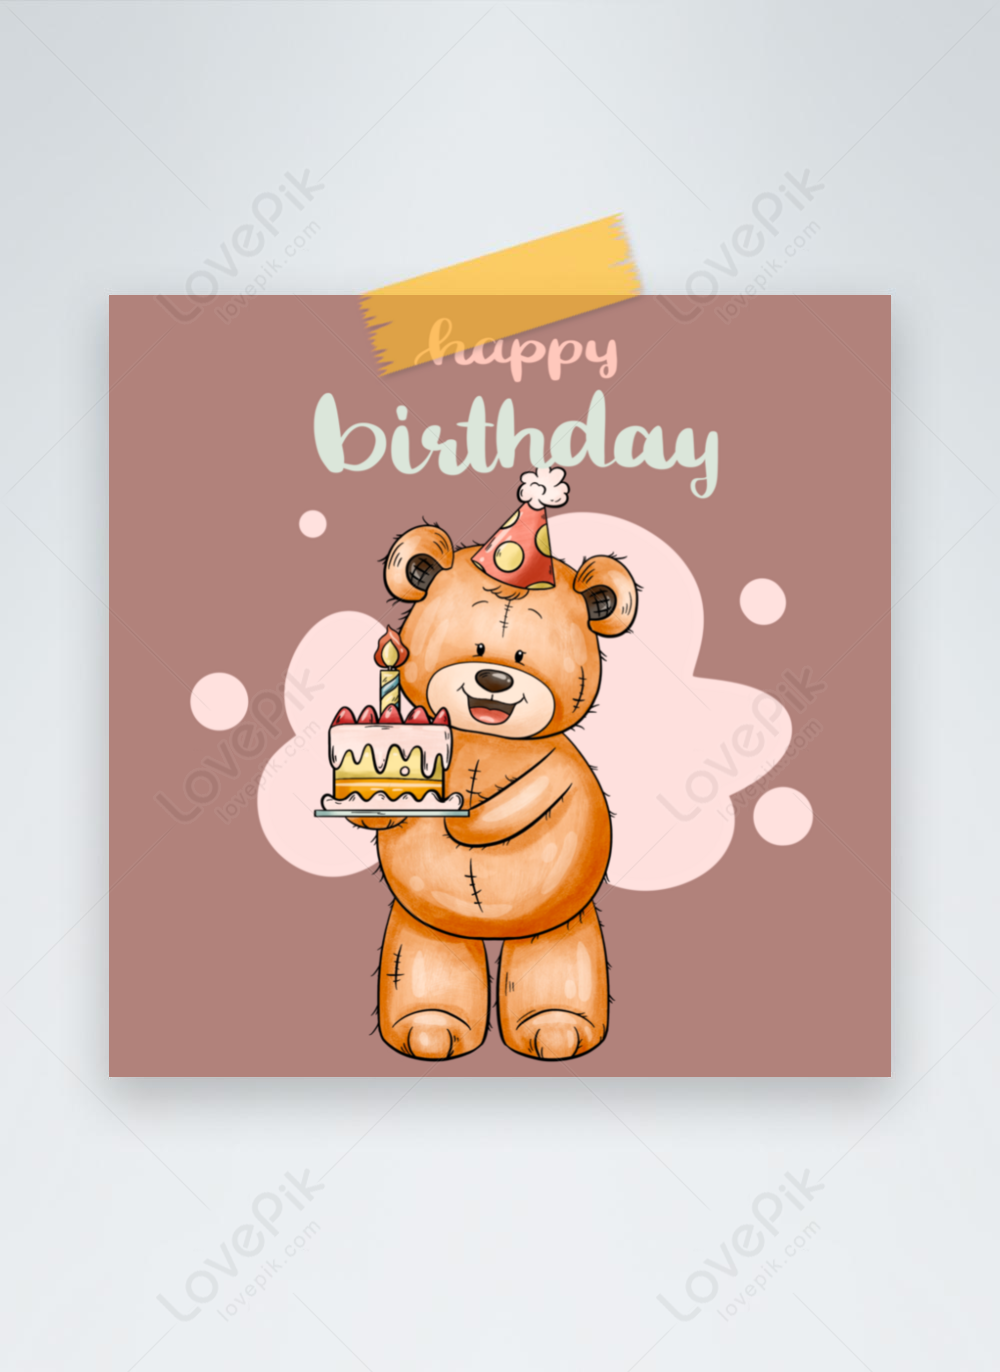 Bear birthday hand drawn style greeting card template image_picture ...